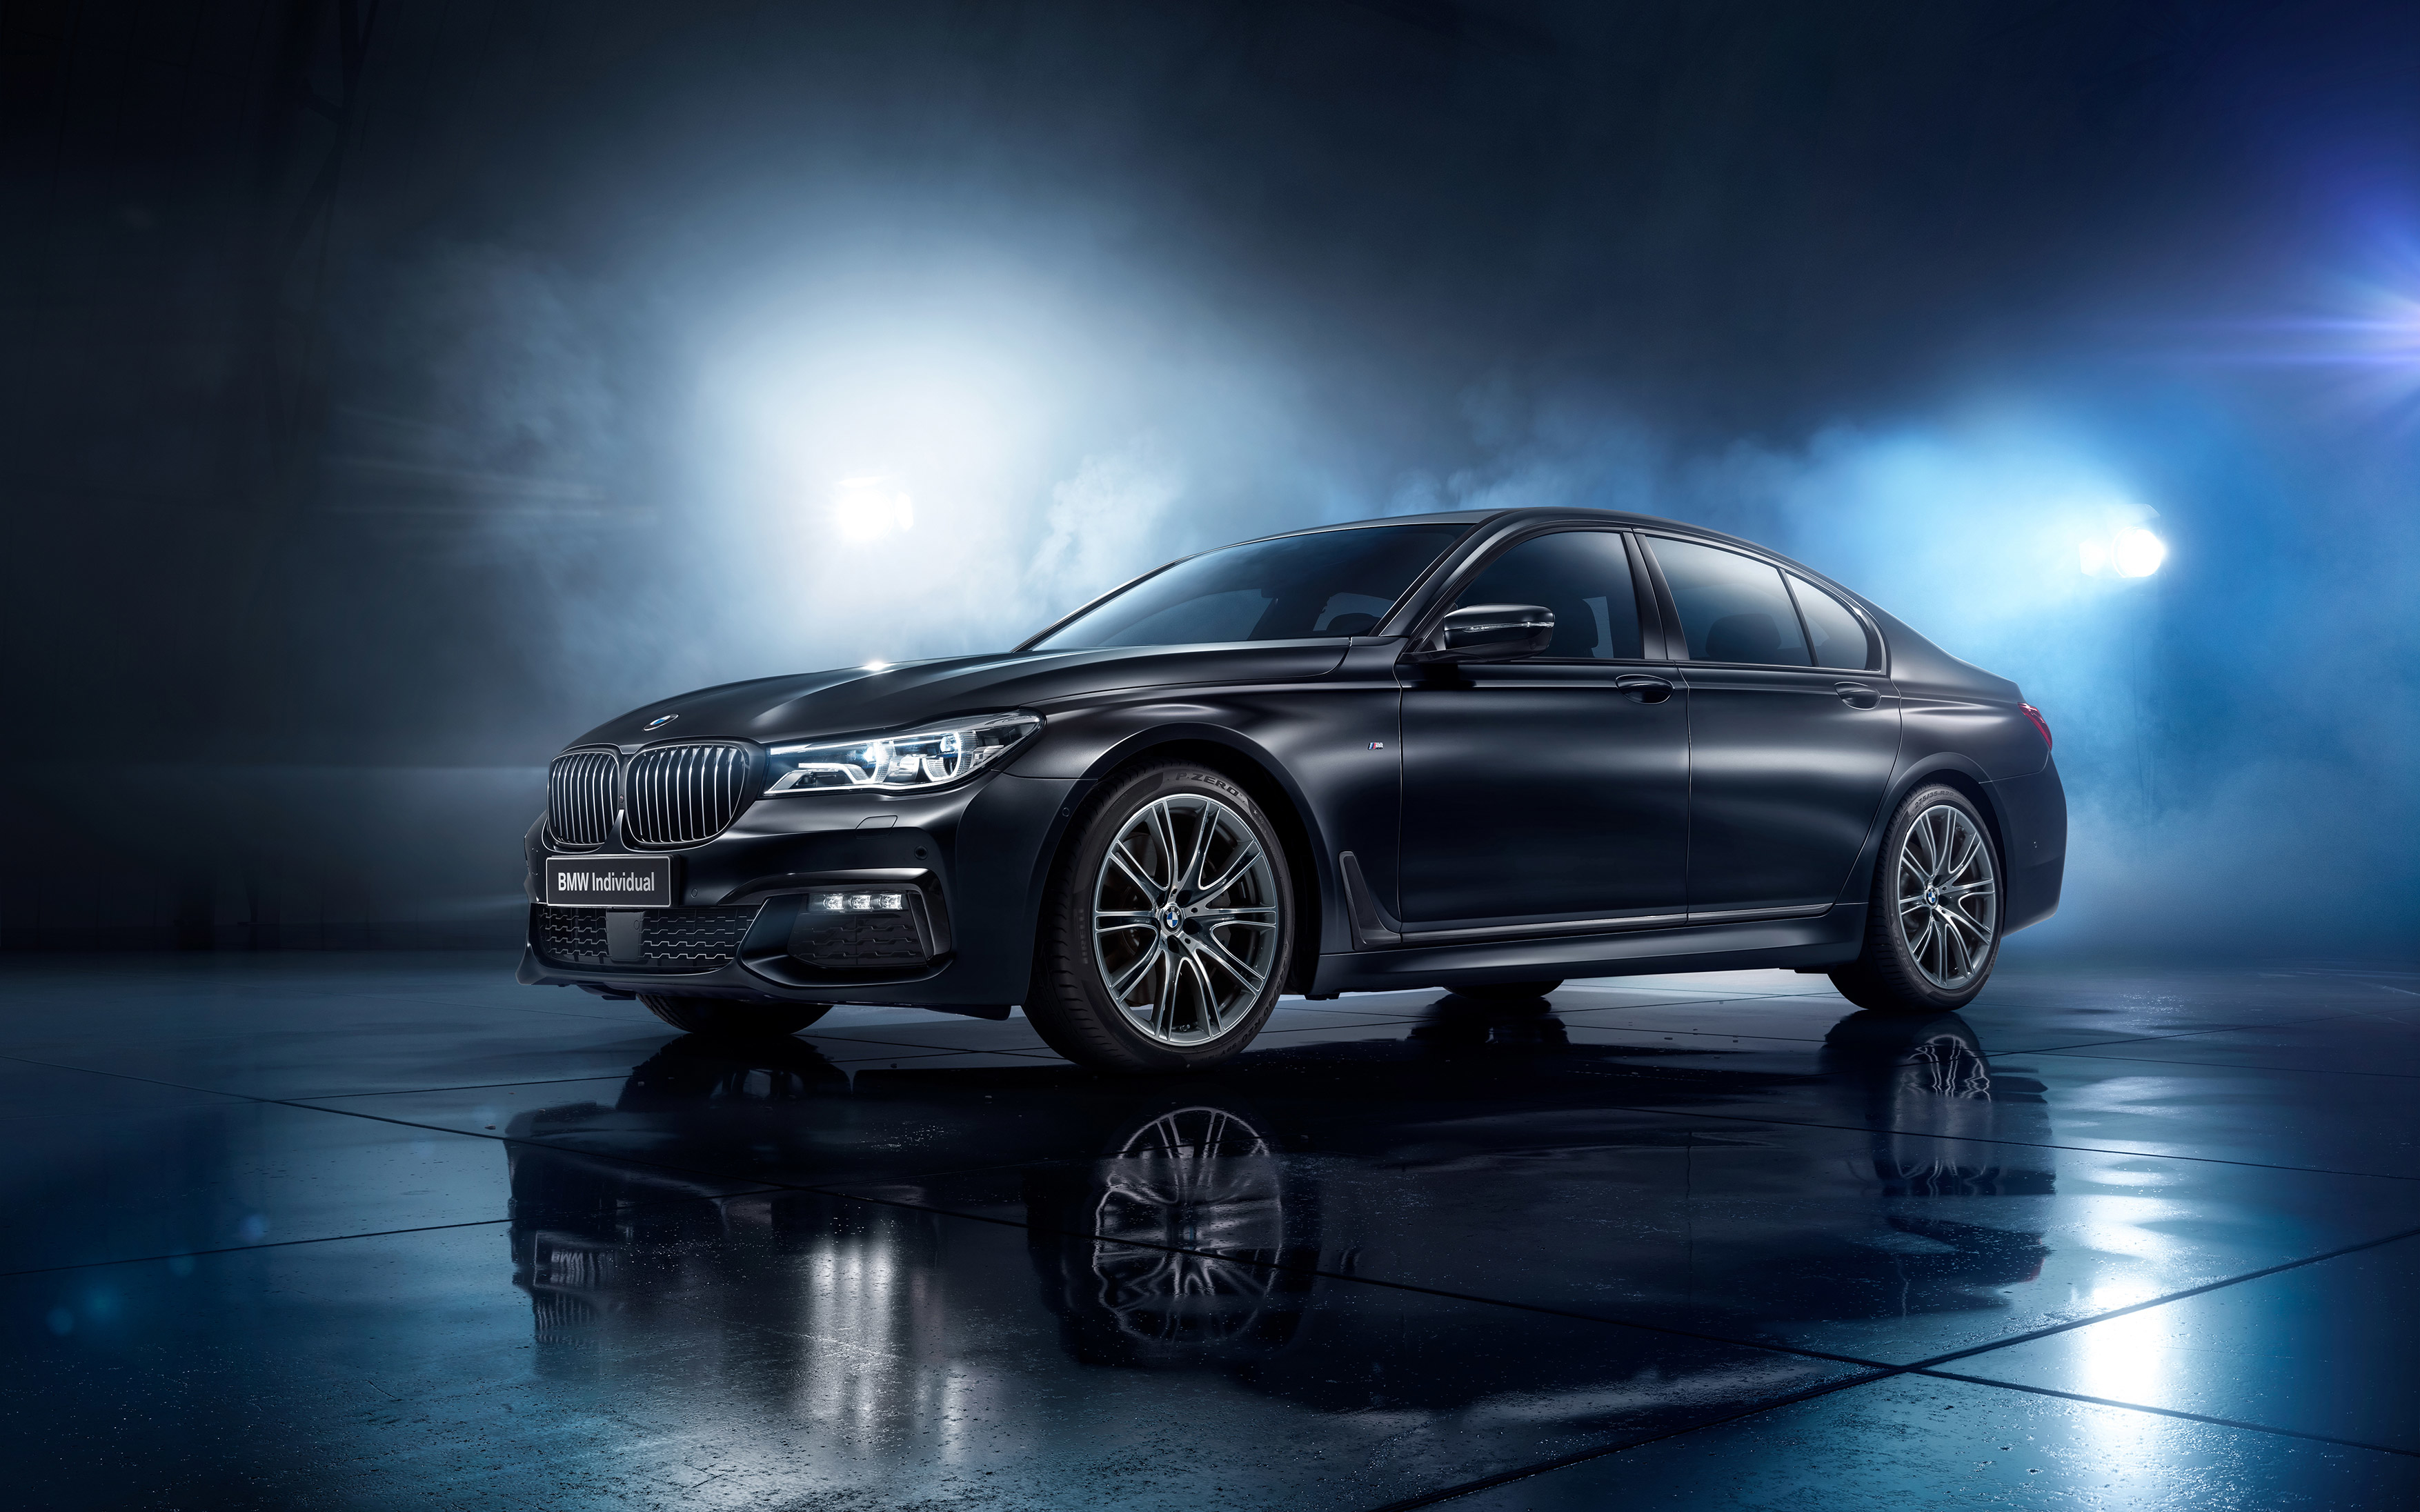 BMW 750i Black Ice Edition 2017 Wallpaper, HD Cars 4K Wallpapers